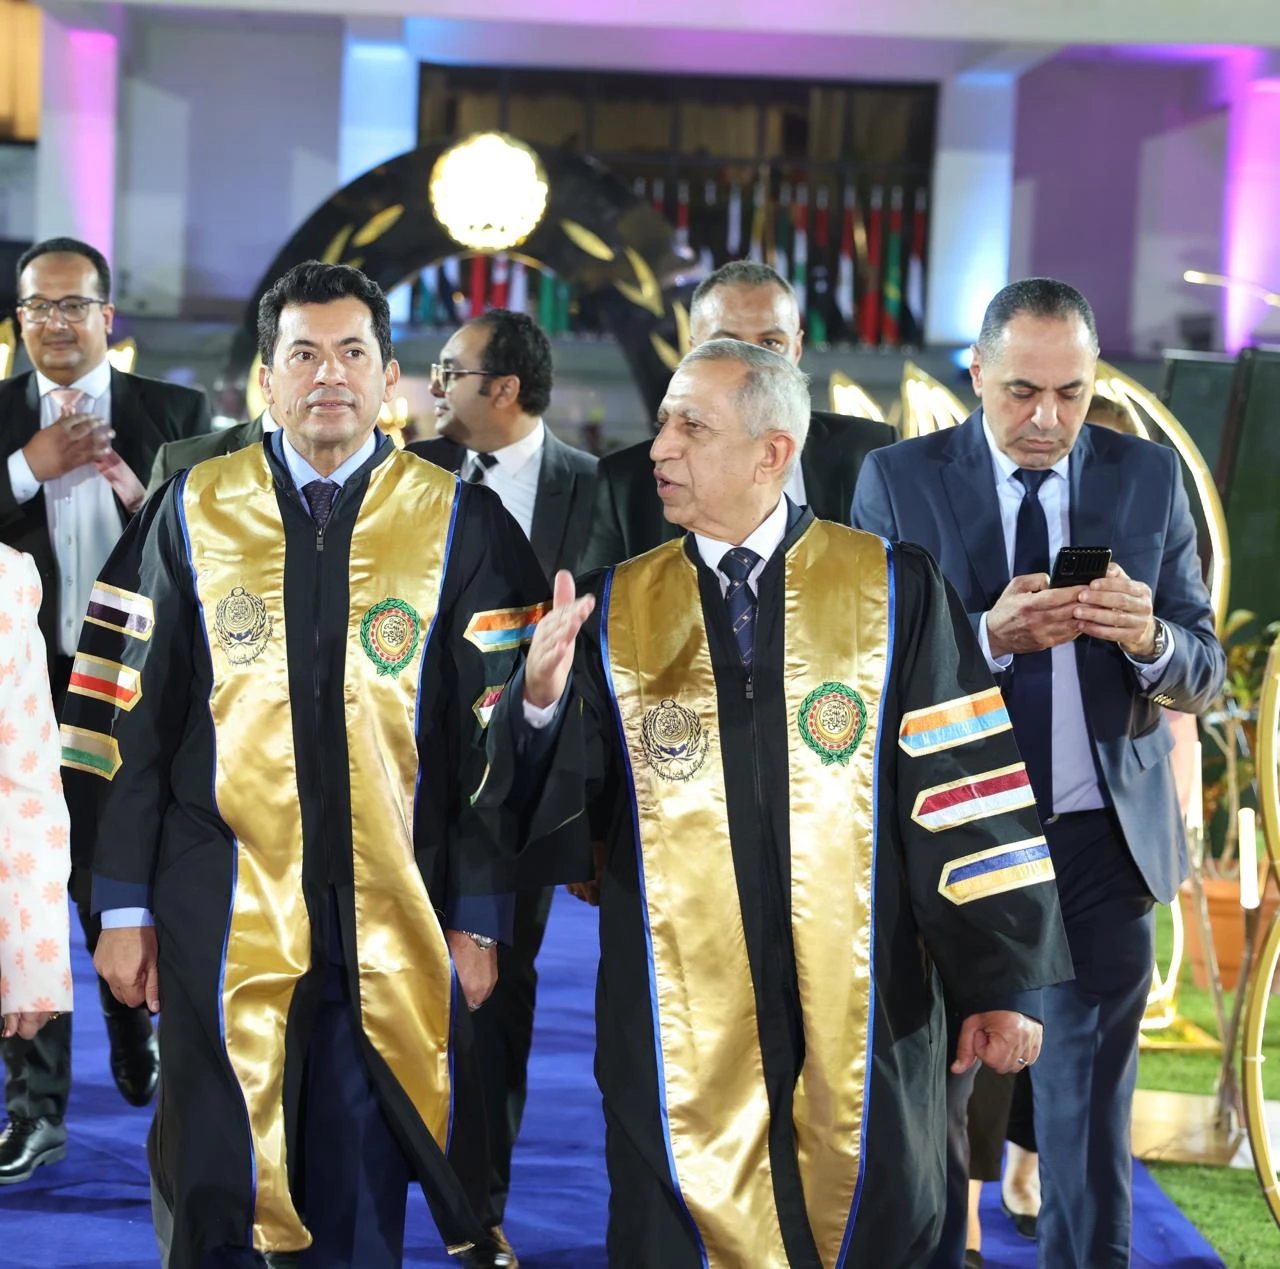 In the presence of the Minister of Youth and the Governor of New Valley The Arab Academy celebrates the graduation of 420 graduates from the Graduate School of Management in Alexandria